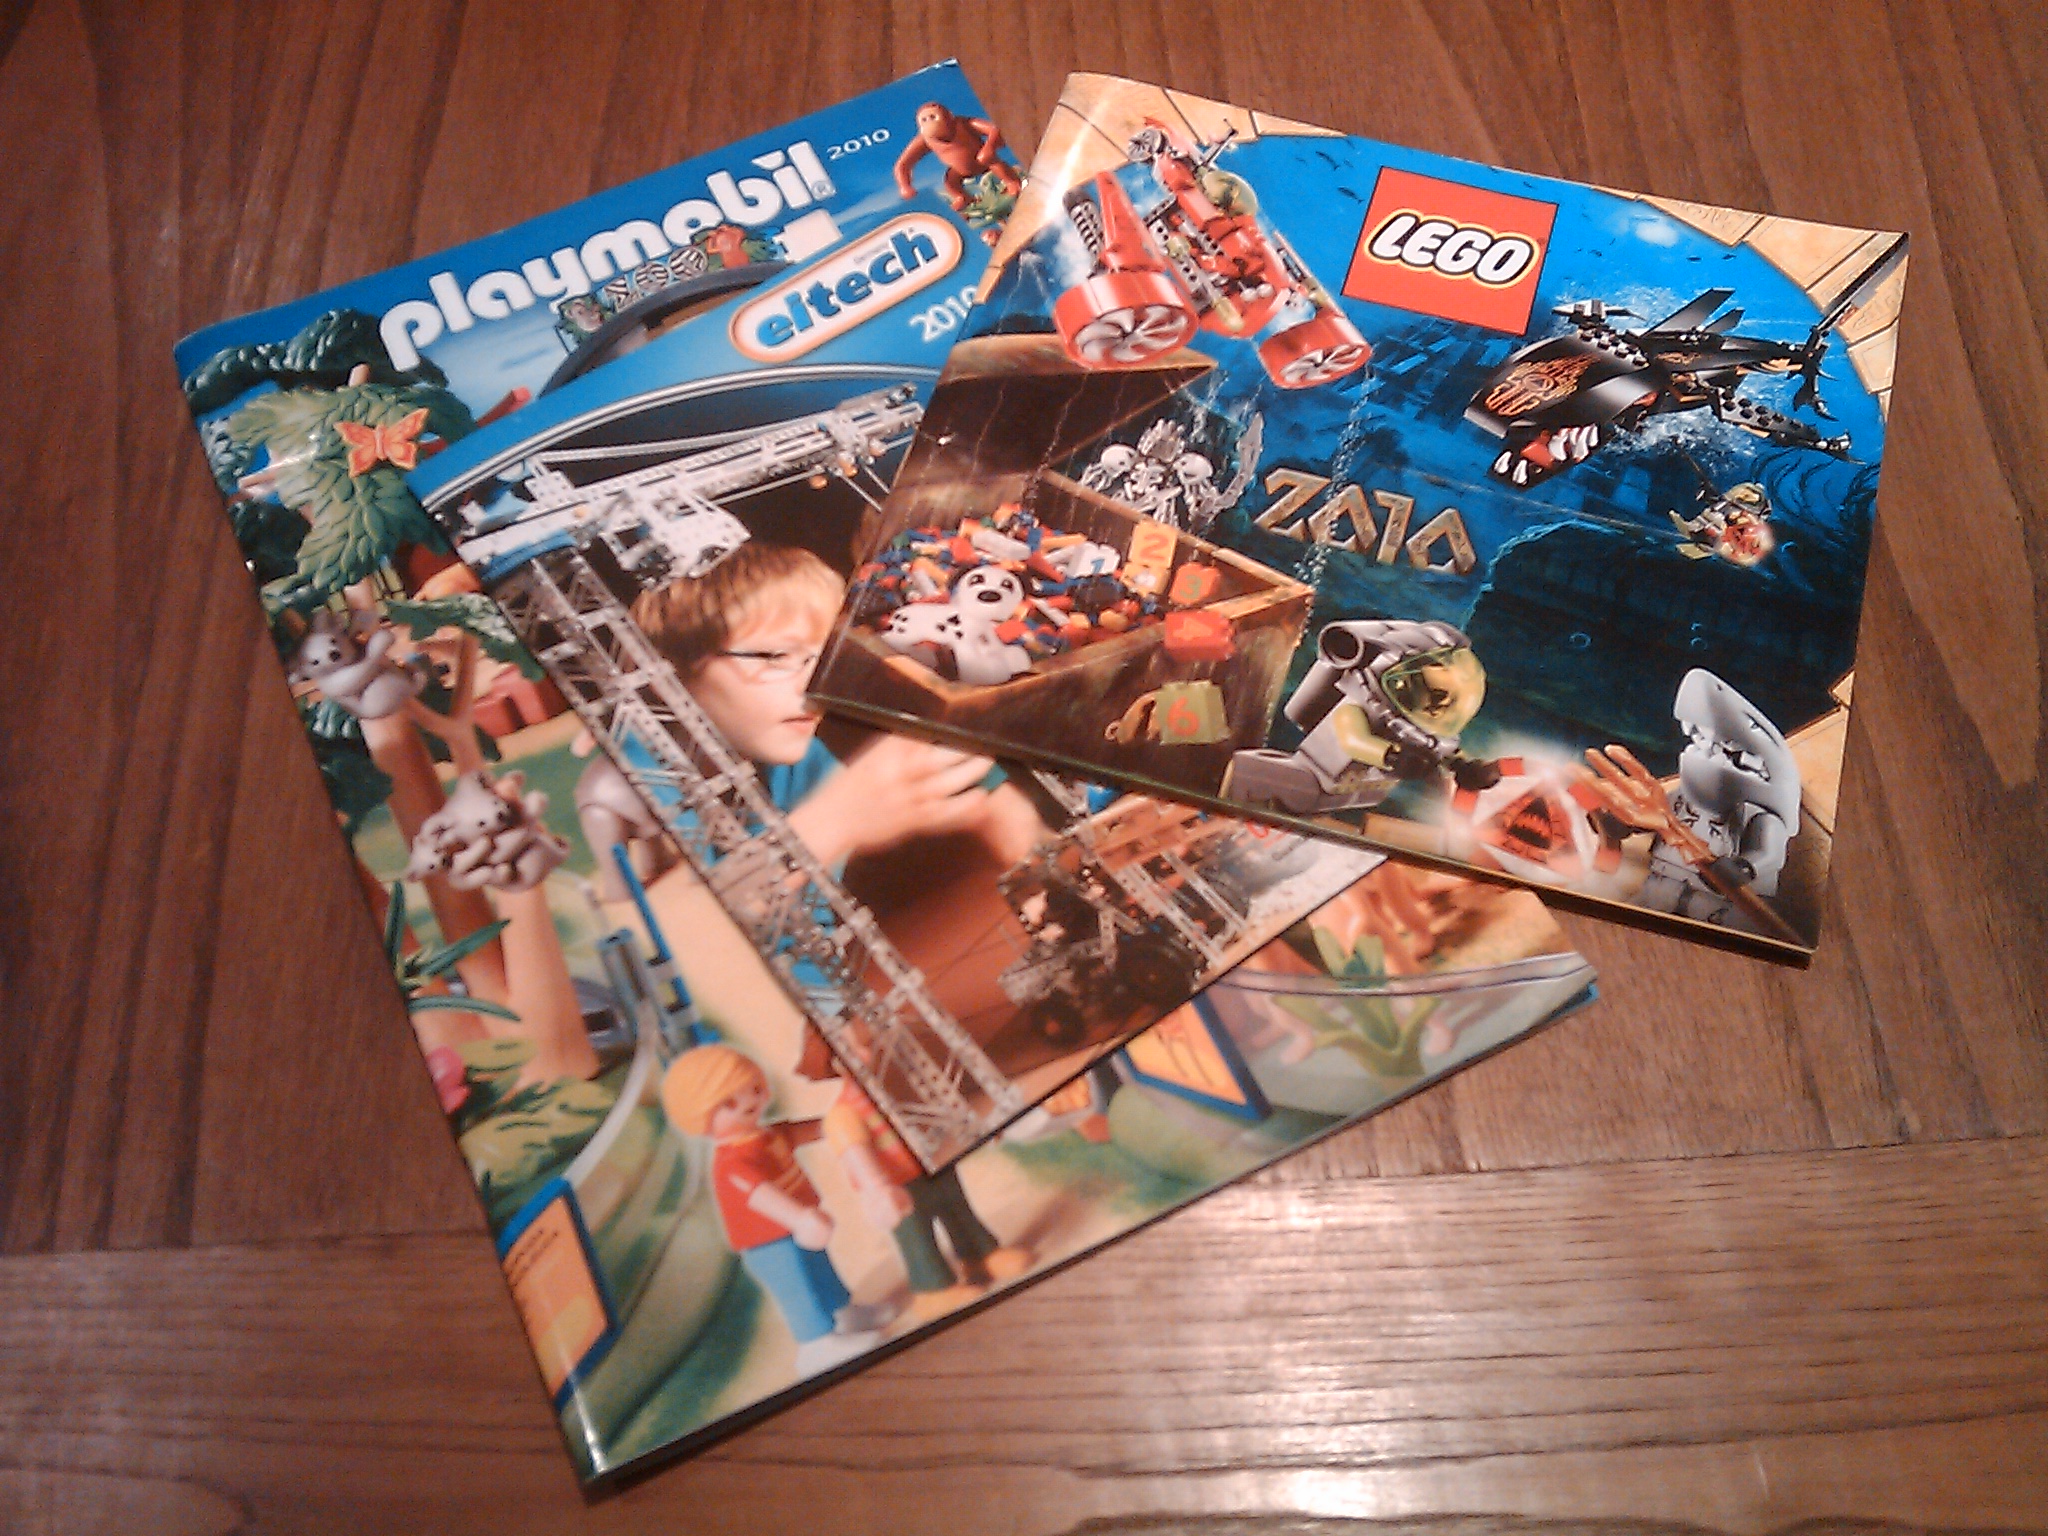 the two magazines have many lego minifigures